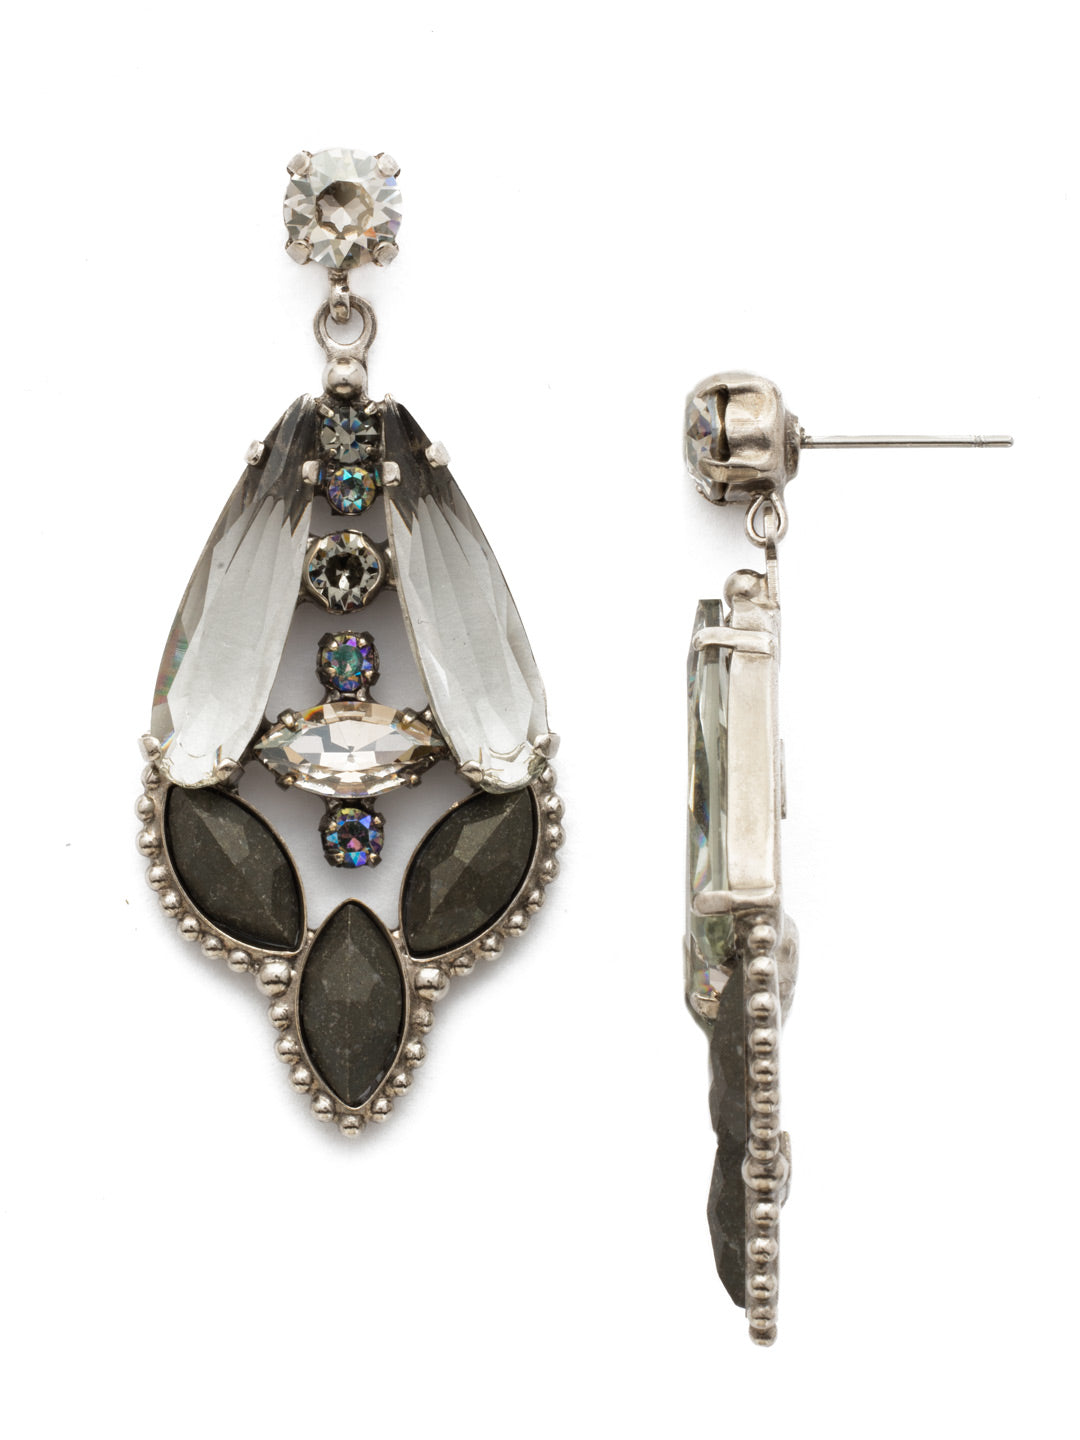 Brilliant Boho Earring - EDN97ASCRO - <p>A fun design perfect for everyday styling! The unique combination of crystals and cabochons creates this bohemian vibe. From Sorrelli's Crystal Rock collection in our Antique Silver-tone finish.</p>